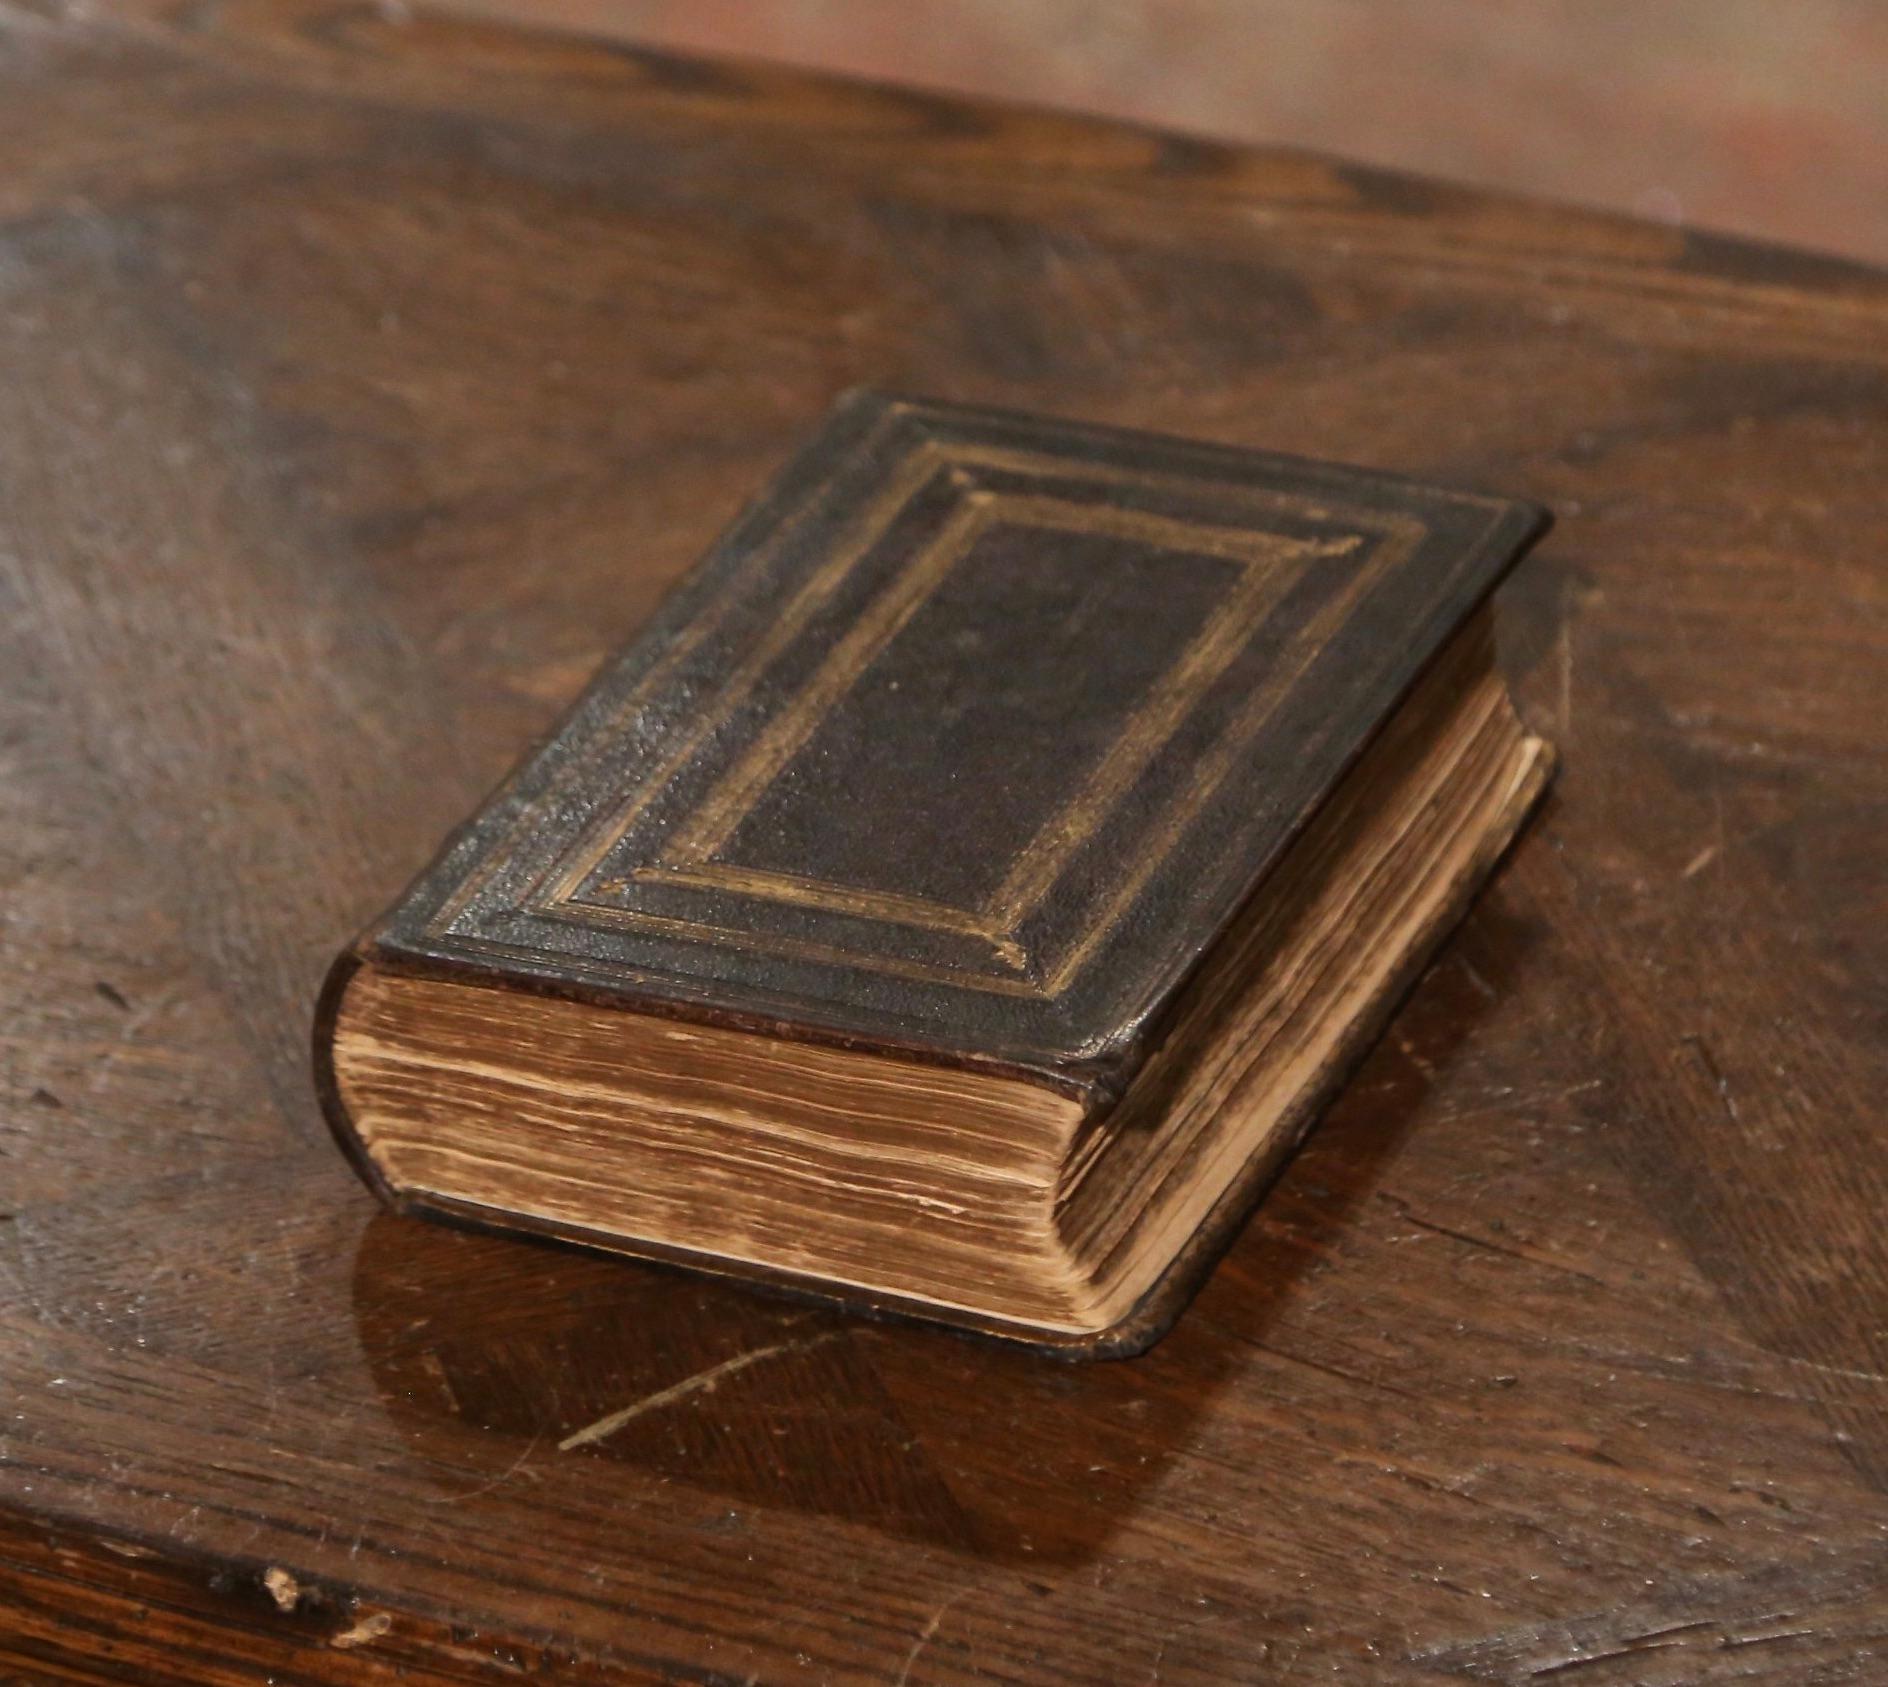 Listen to the word of God with this antique family Bible. Printed in London by George E. Eyre and William Spottiswoode in 1847, the Holy book is dressed with embossed brown leather and gilt, and further embellished with gold leaf page edges.The